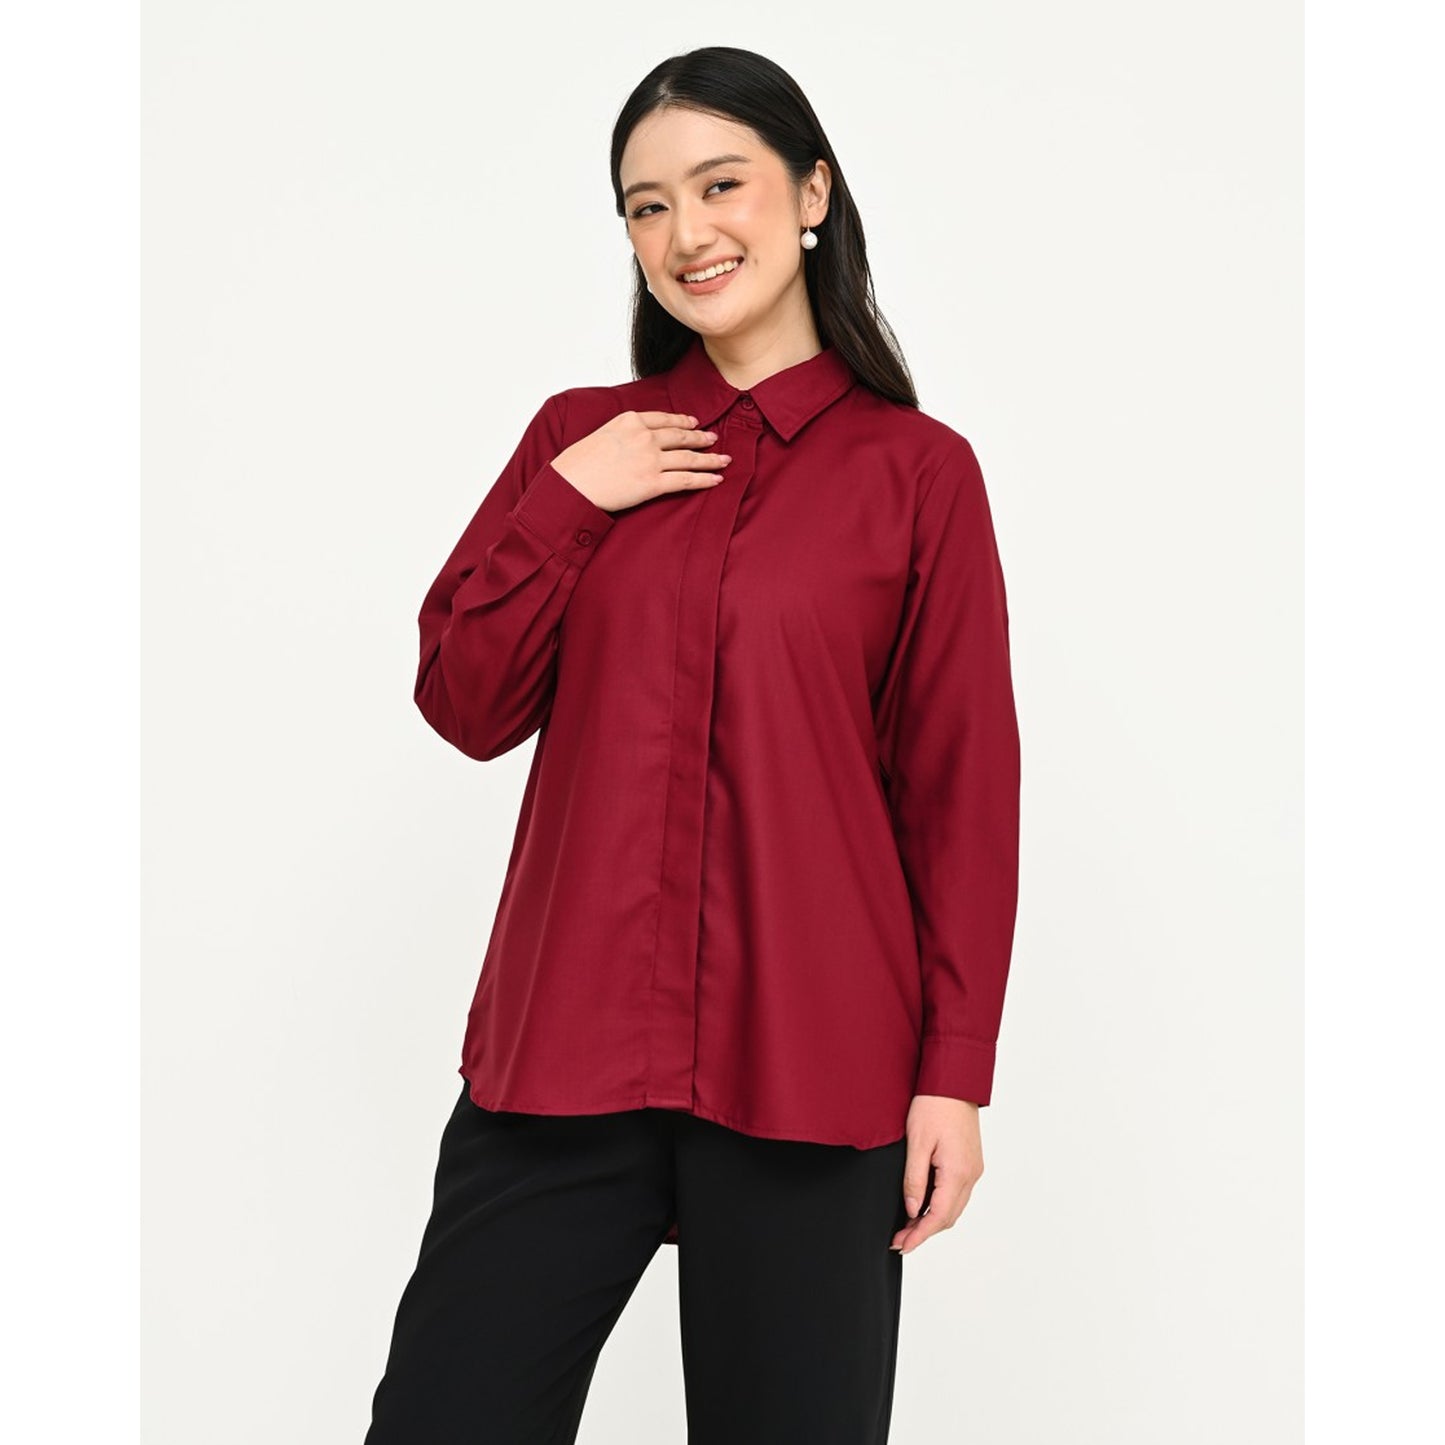 Stylish Simplicity Daily Shirt Red Series with a Variety of Colors, Women Blouse, Batik Blouse, Blouse For Women, Ethnic Dress, Women Shirt